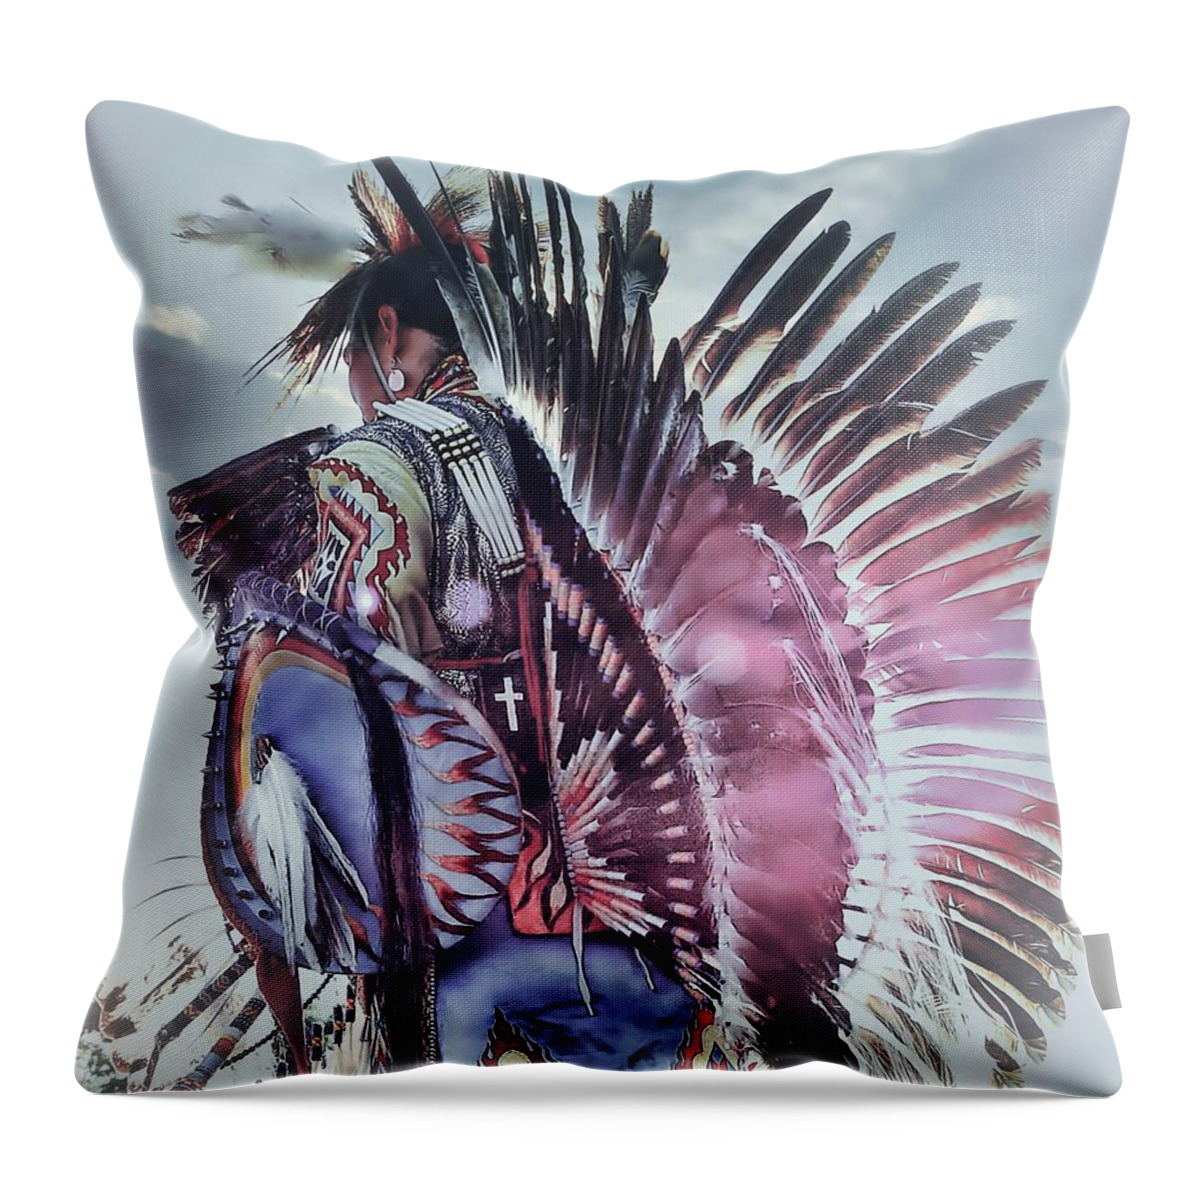 Aboriginal Throw Pillow featuring the photograph Traditional Dancer by Robert Knight